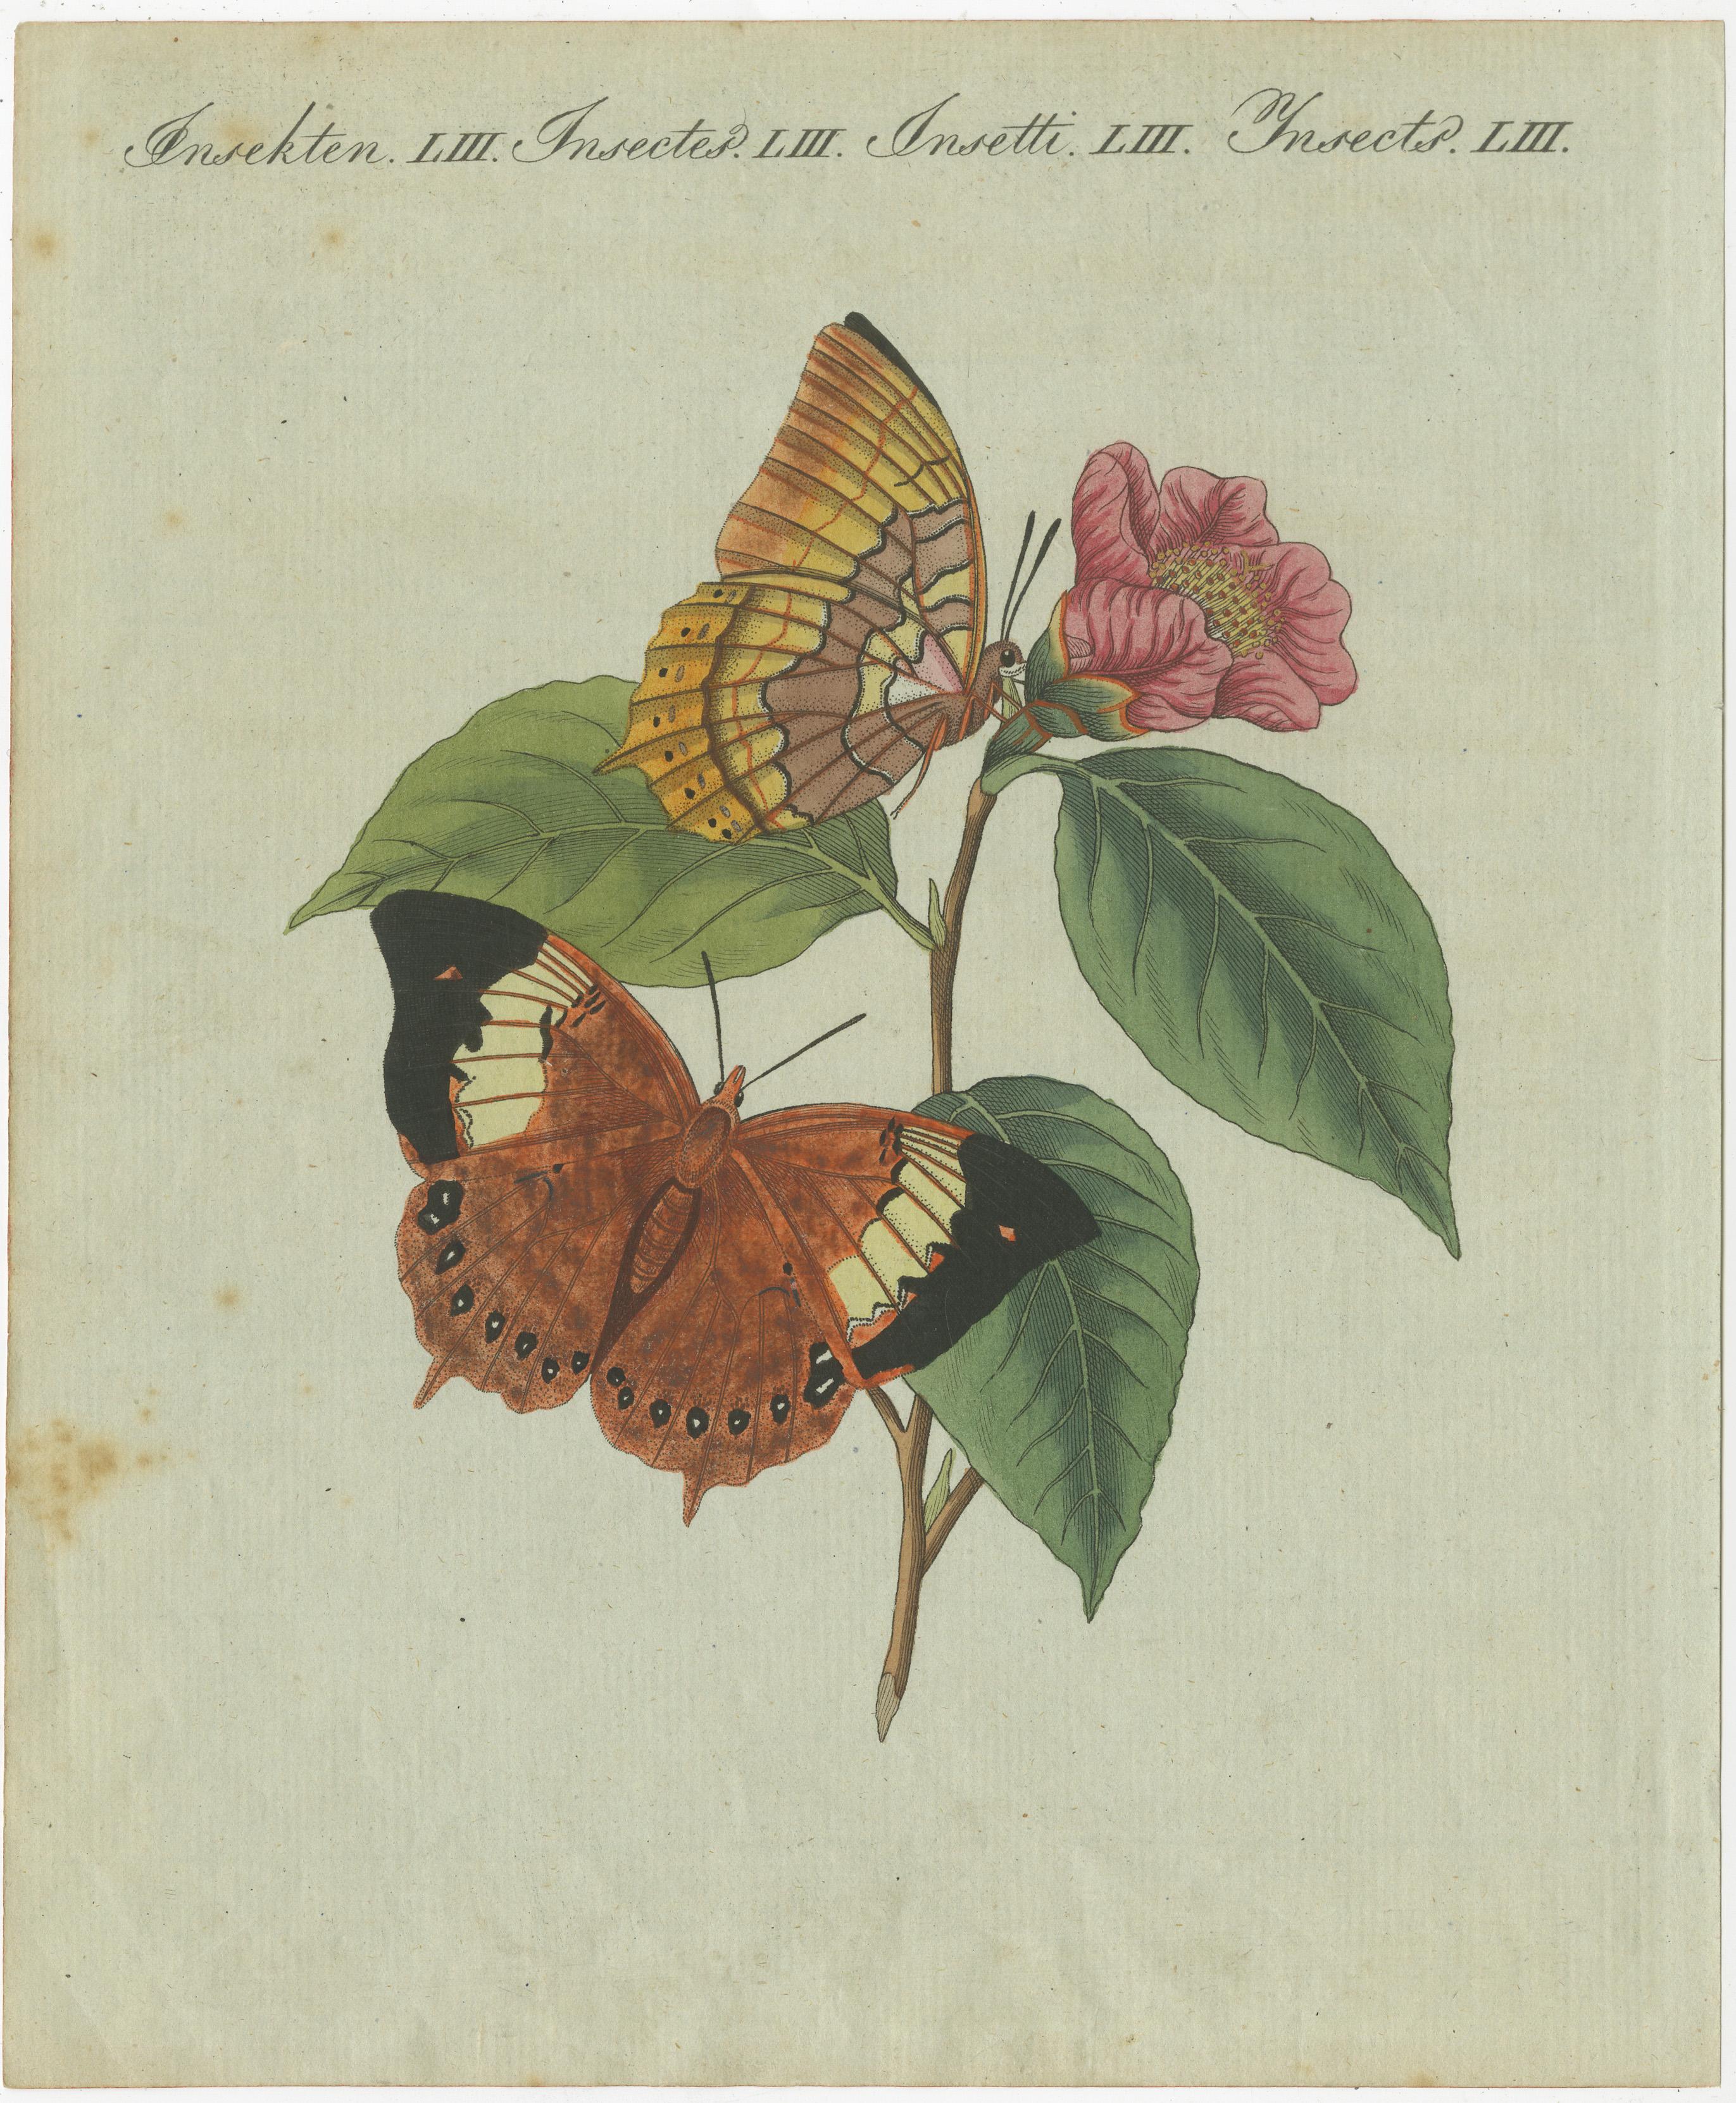 Original antique print of butterflies and a flowering plant. Source unknown, to be determined. Published circa 1800.